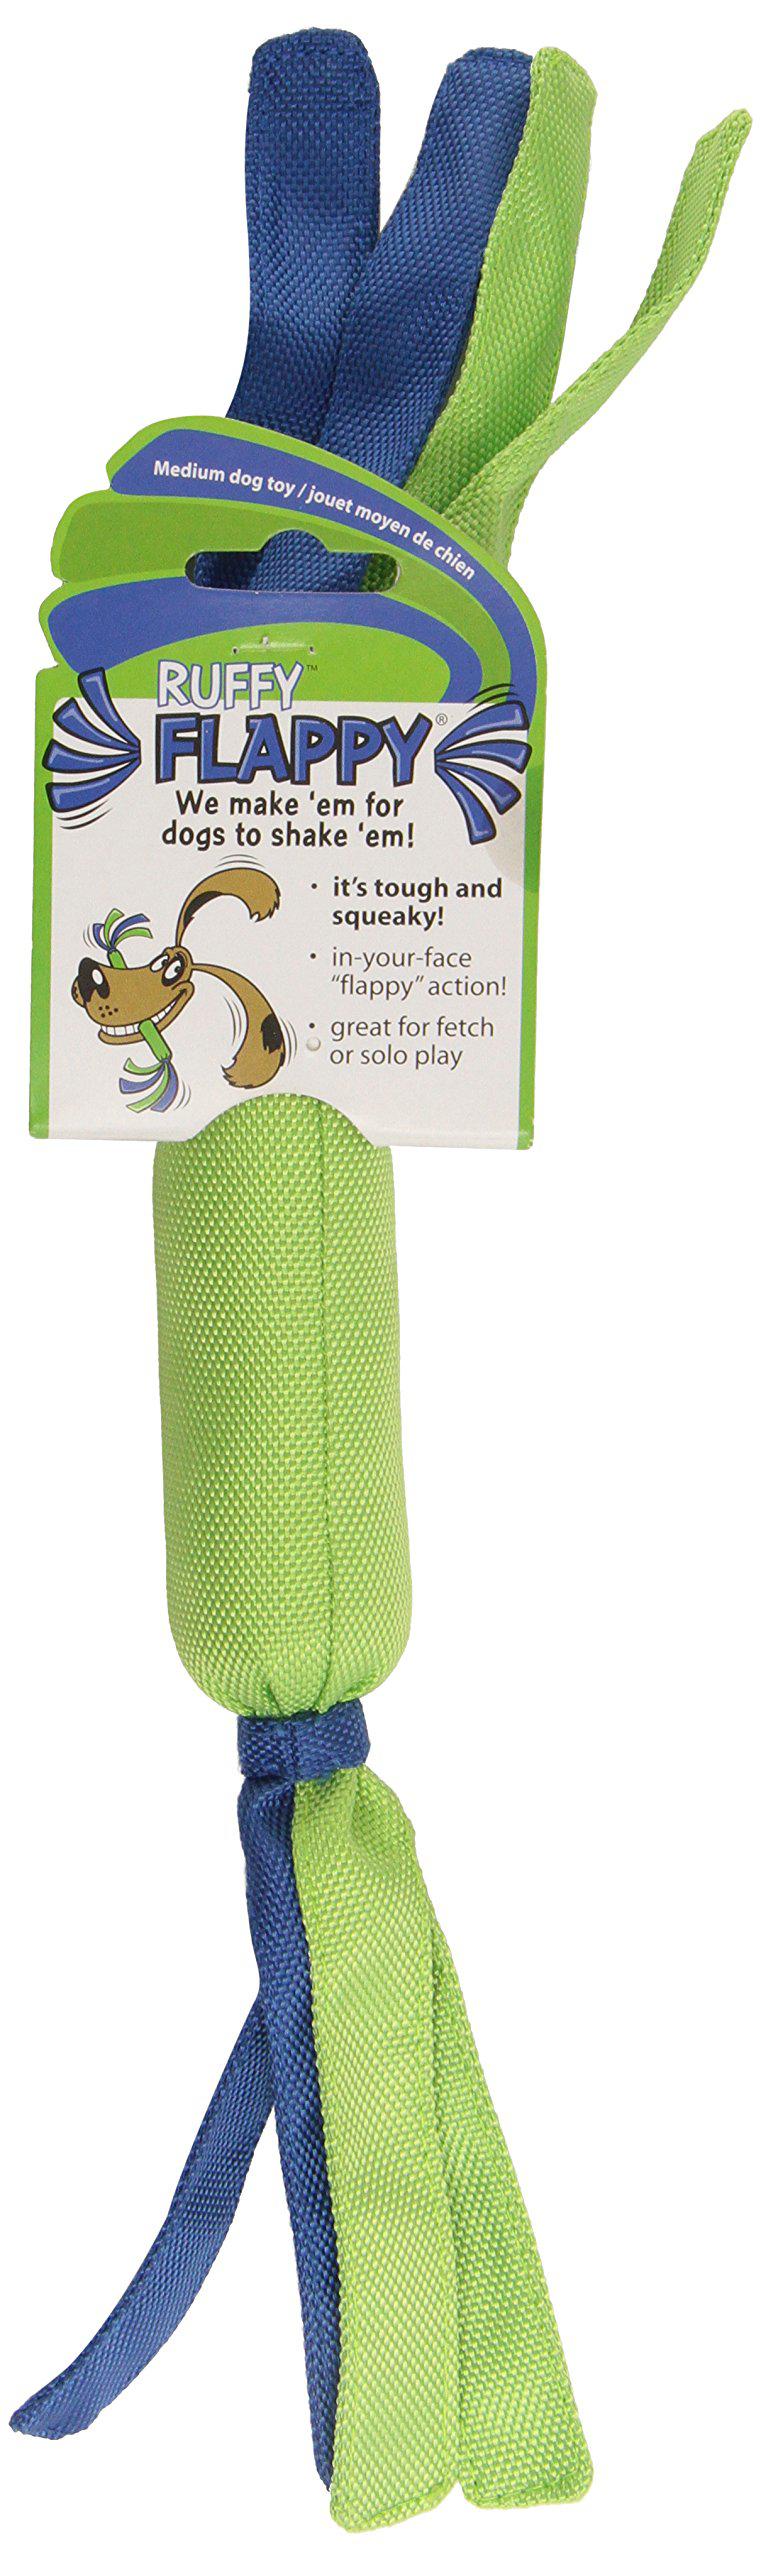 Our Pets ourpets flappy ruffy dog toy medium